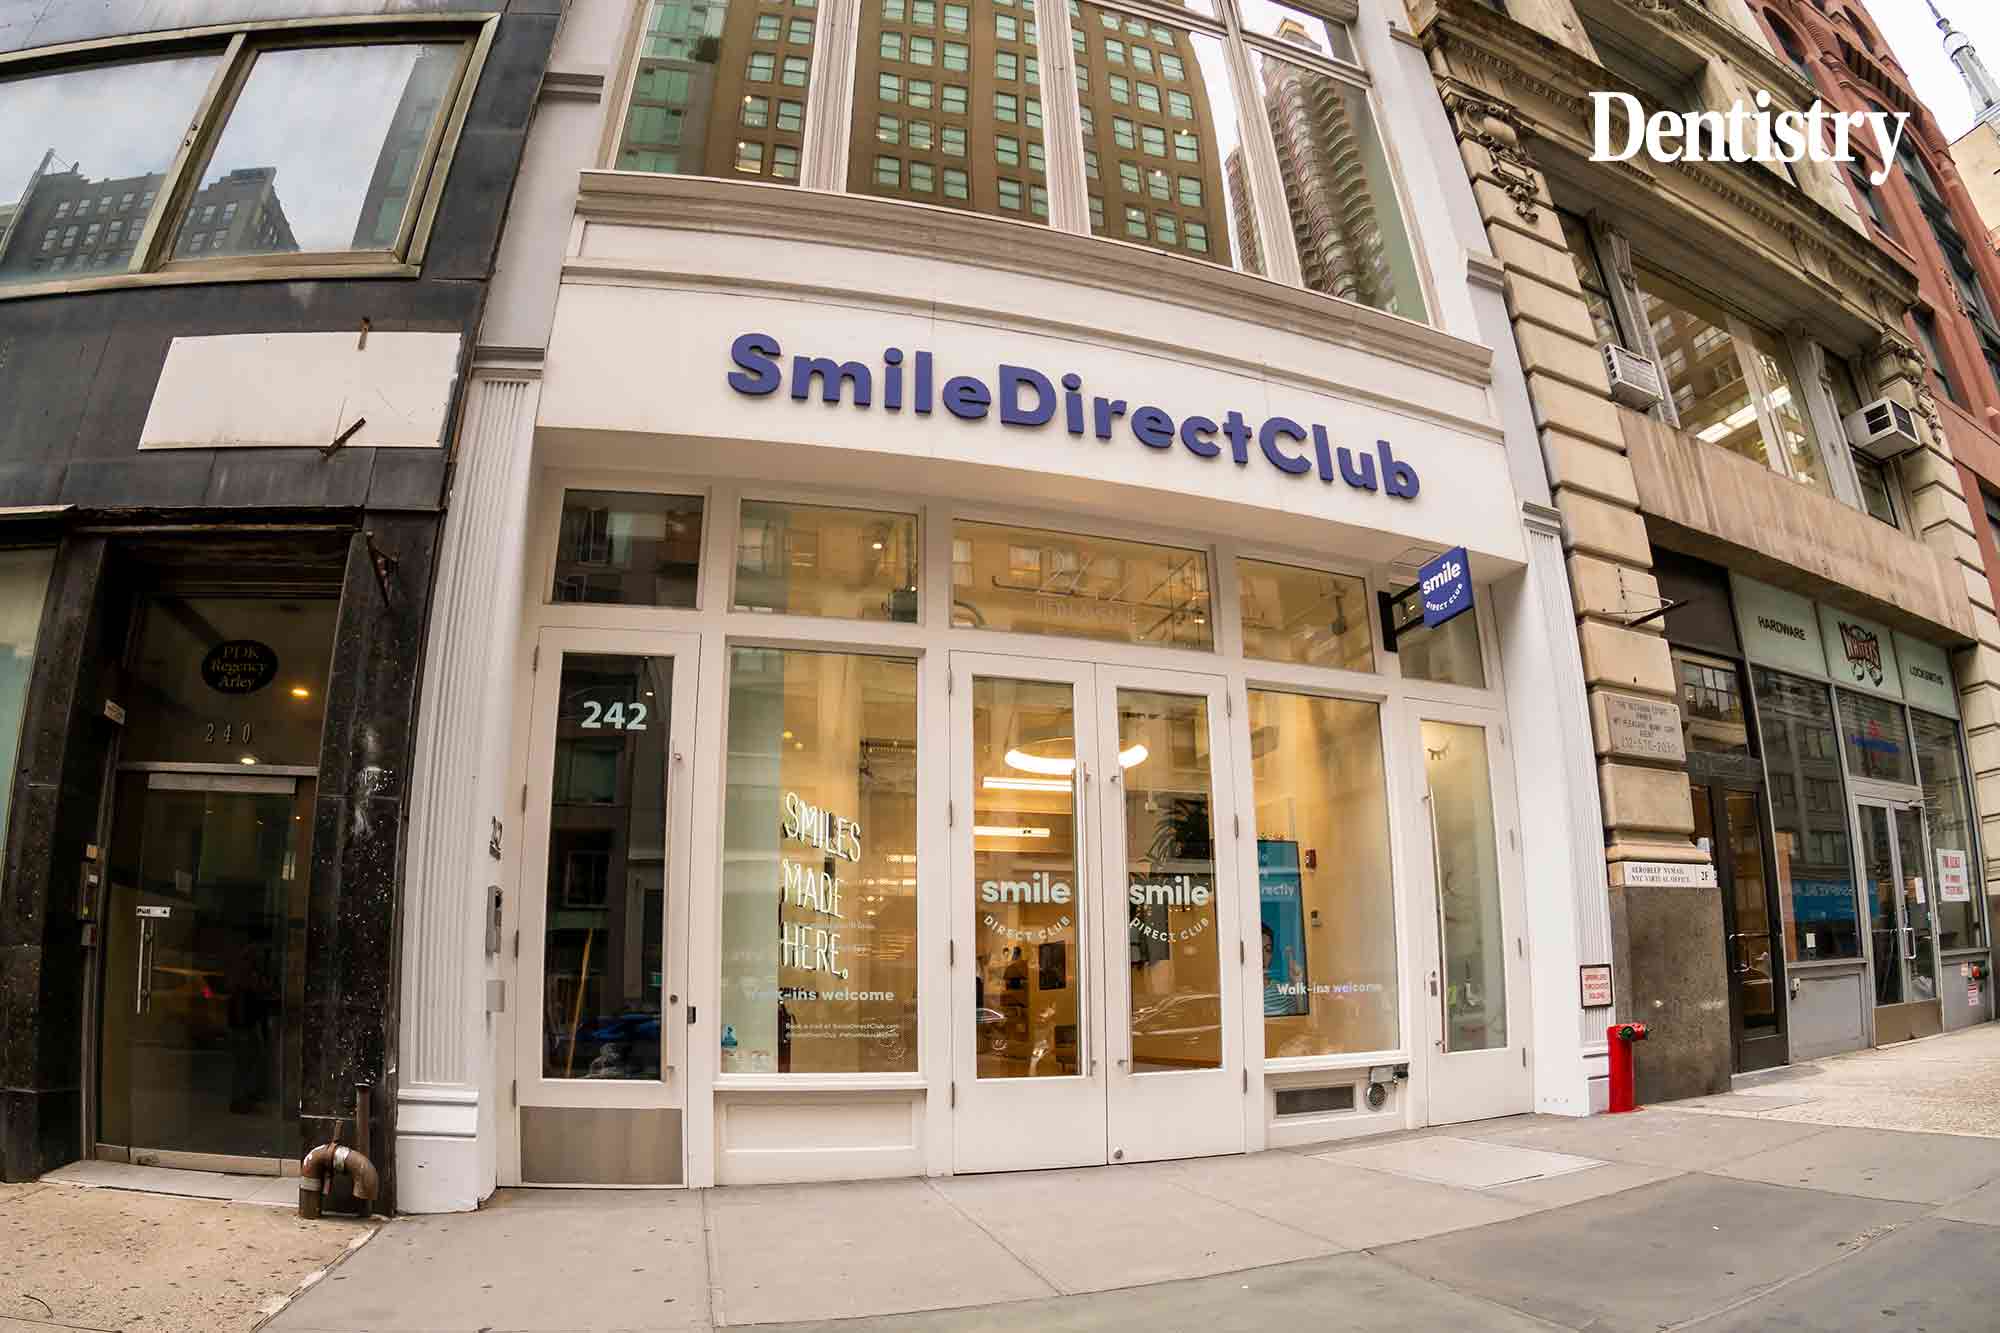 Addressing the plight of Smile Direct Club employees